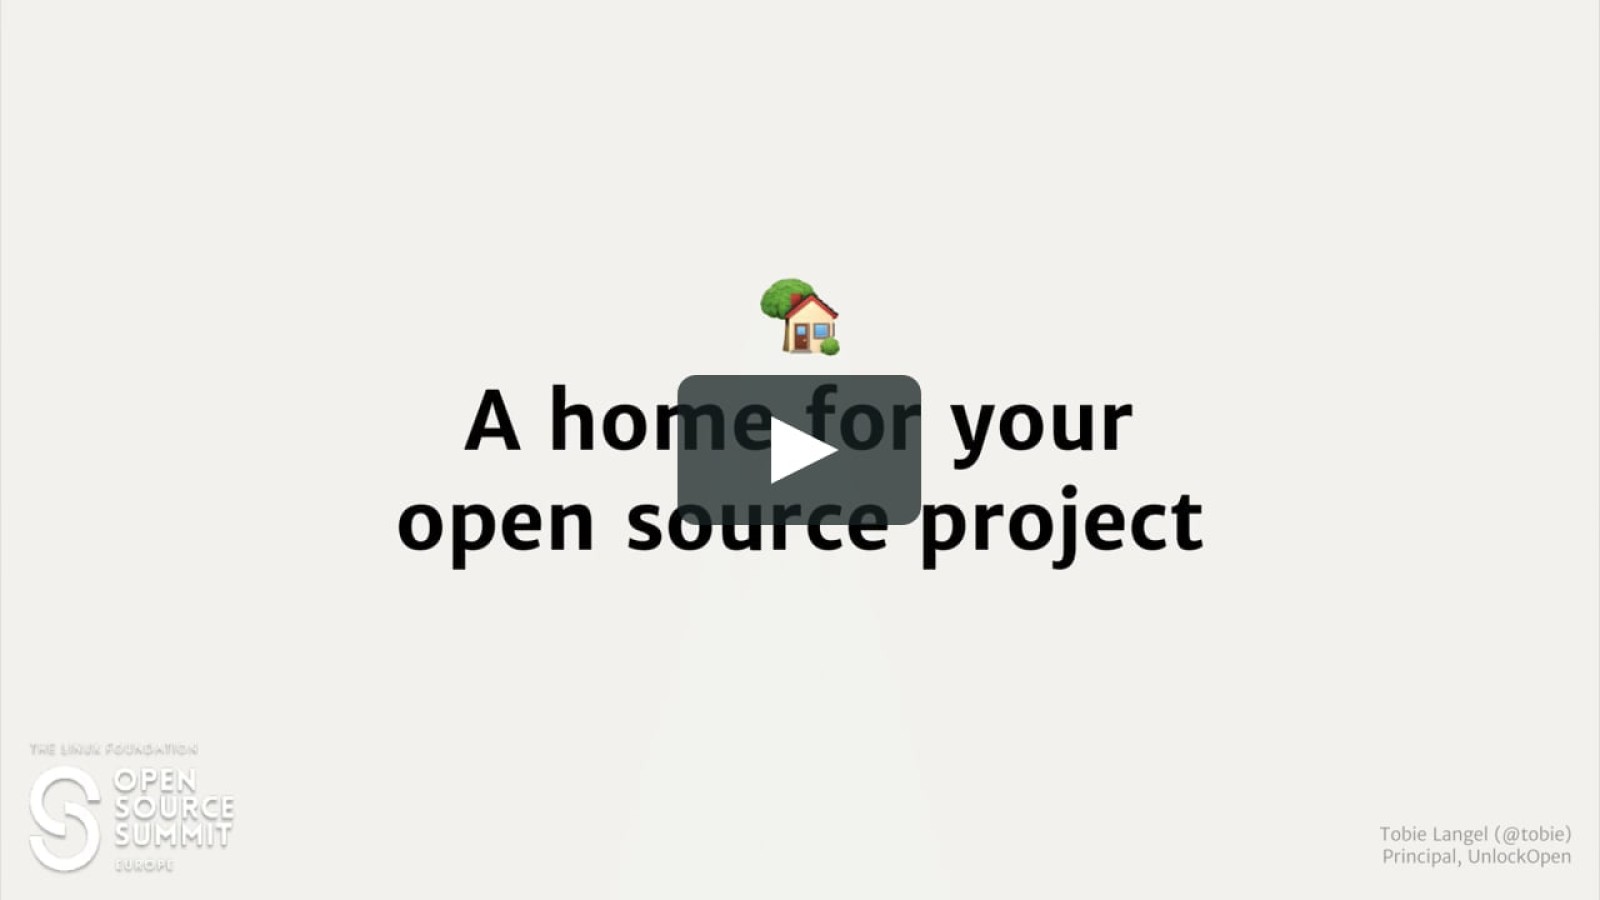 A Home for your open source project